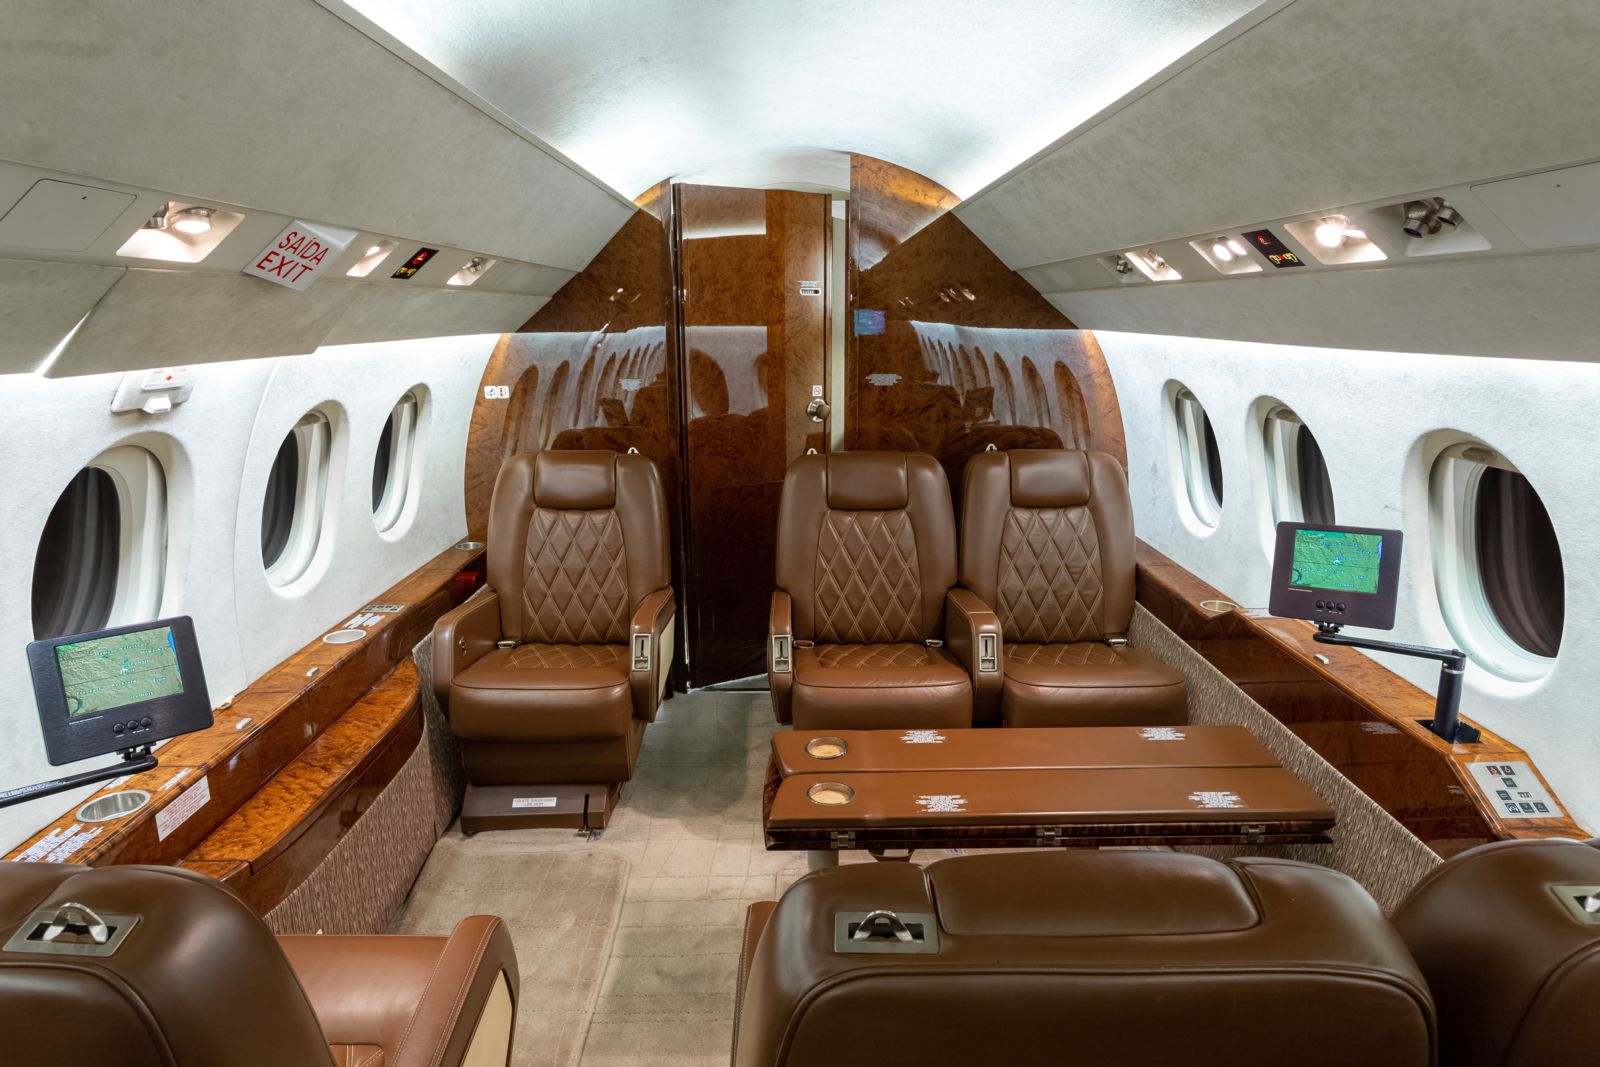 Dassault Falcon 2000  S/N 205 for sale | gallery image: /userfiles/images/205/bfp_6273.jpg